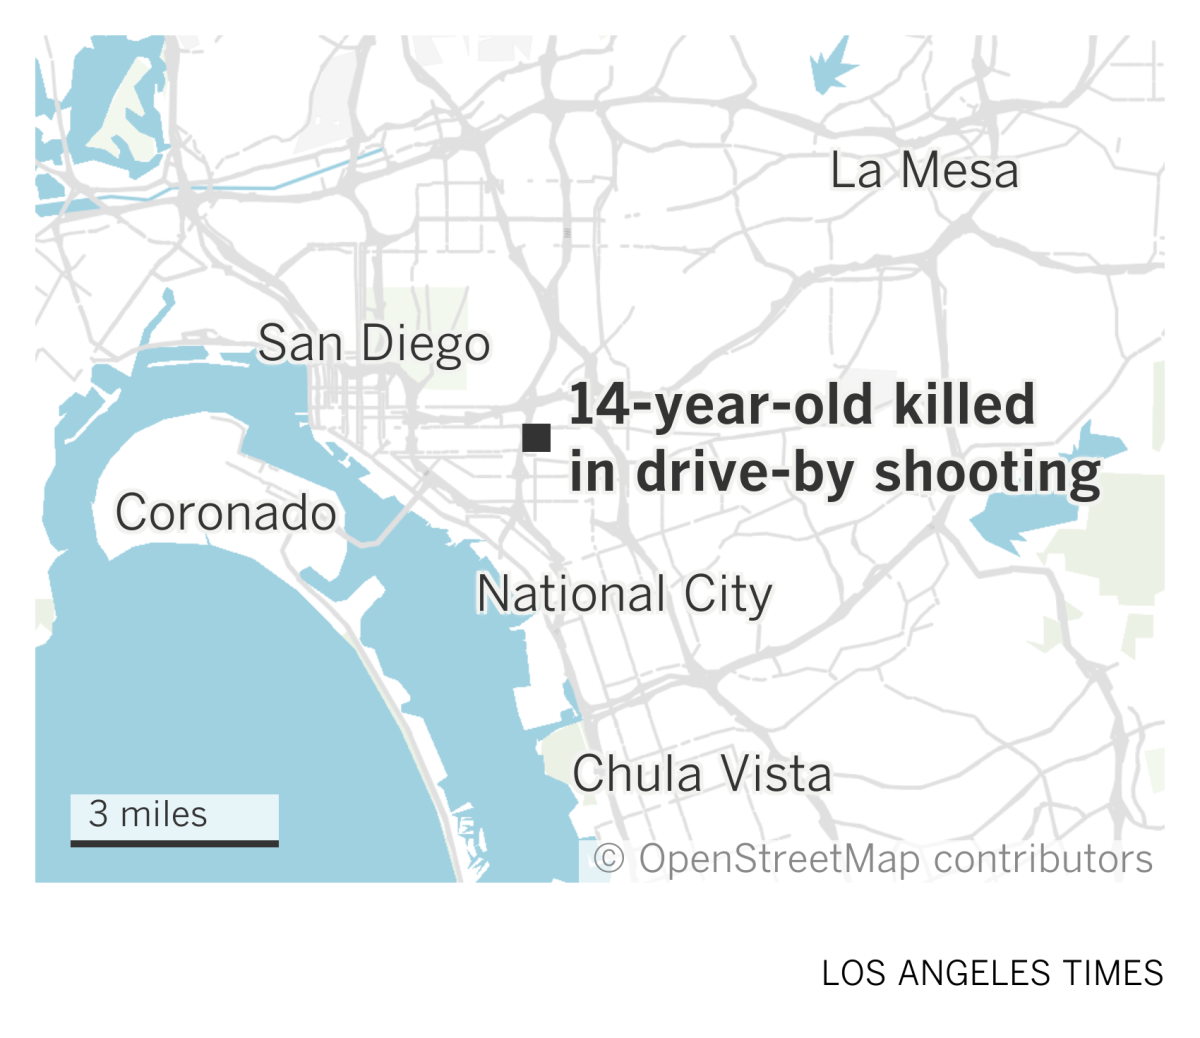 A map of San Diego showing where a 14-year-old boy was killed